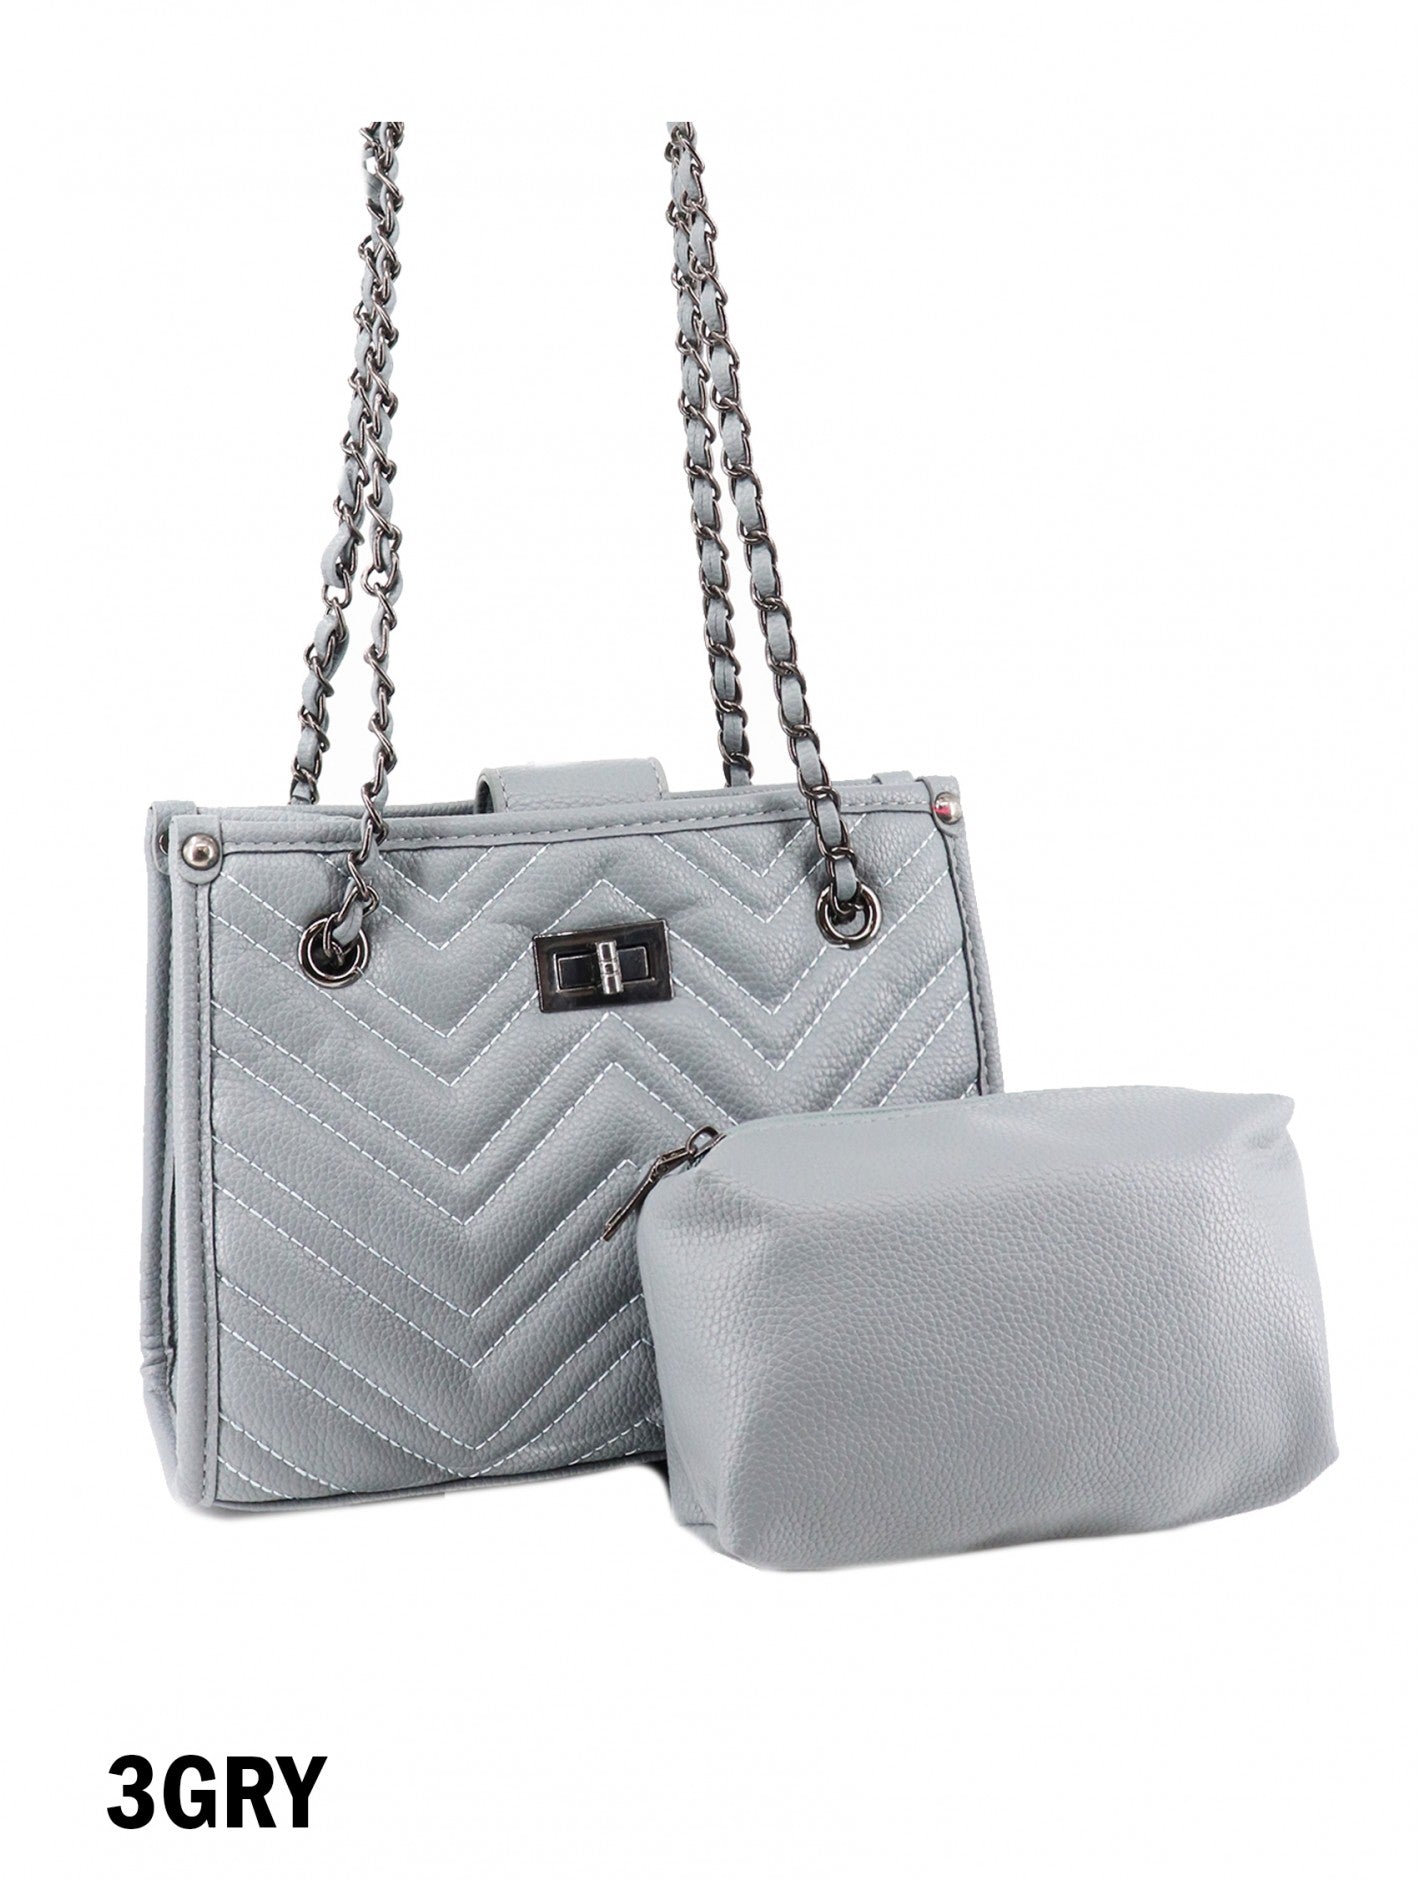 Grey Satchel Bag with Small Pouch